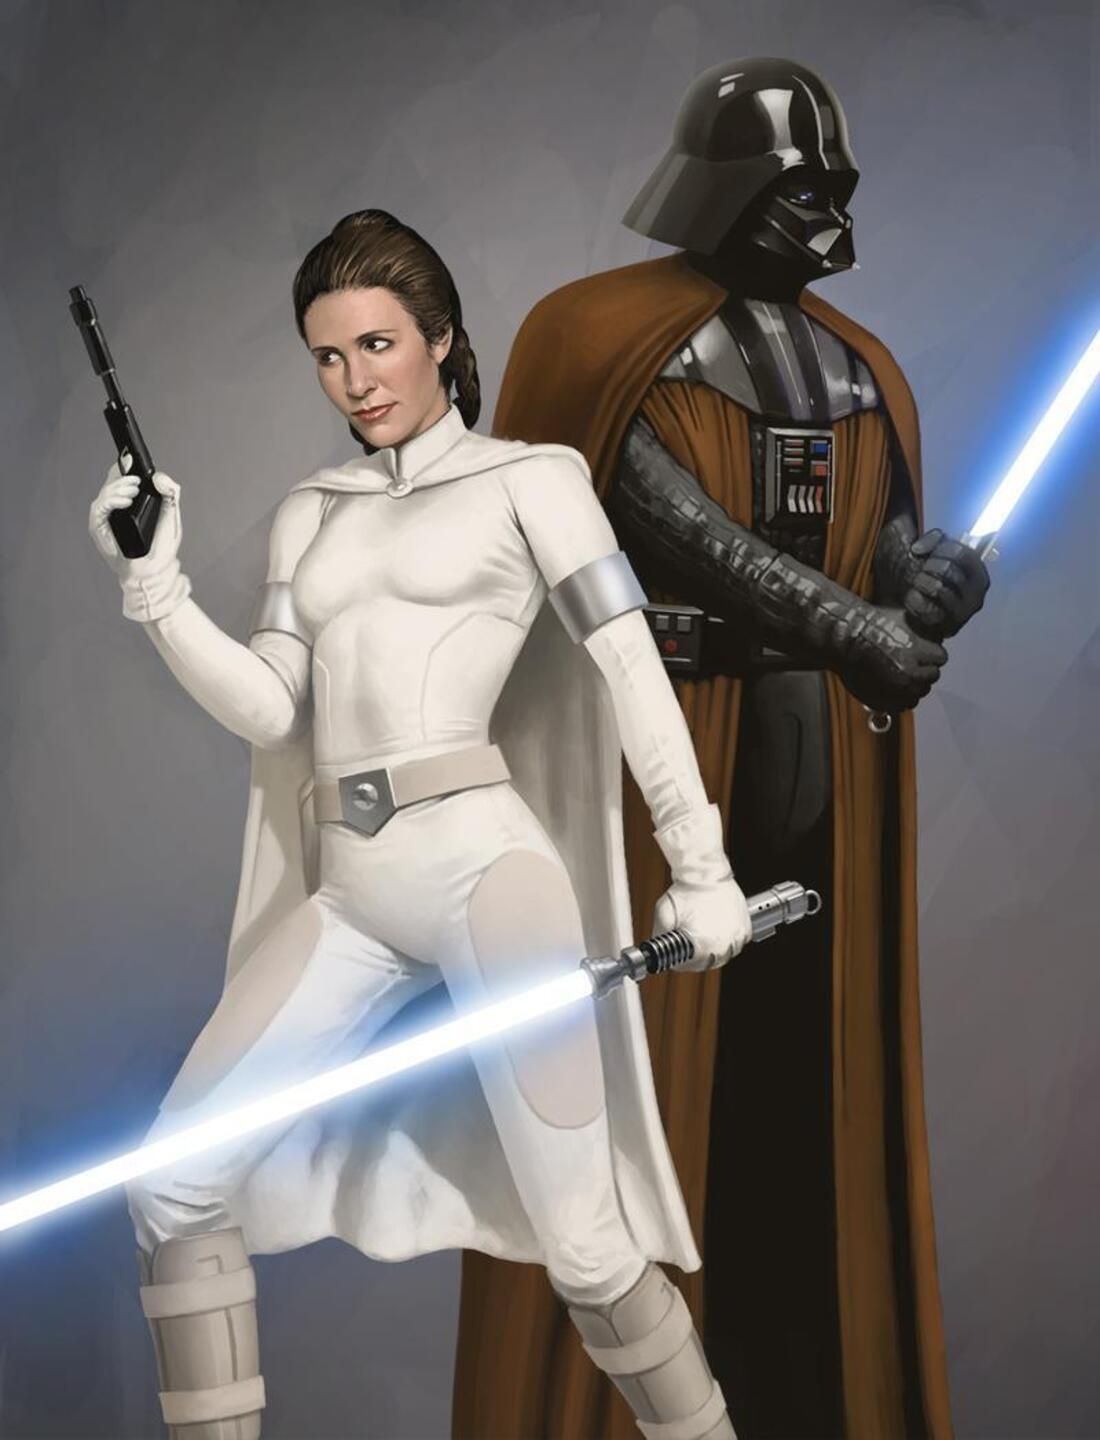 Leia and Vader standing together